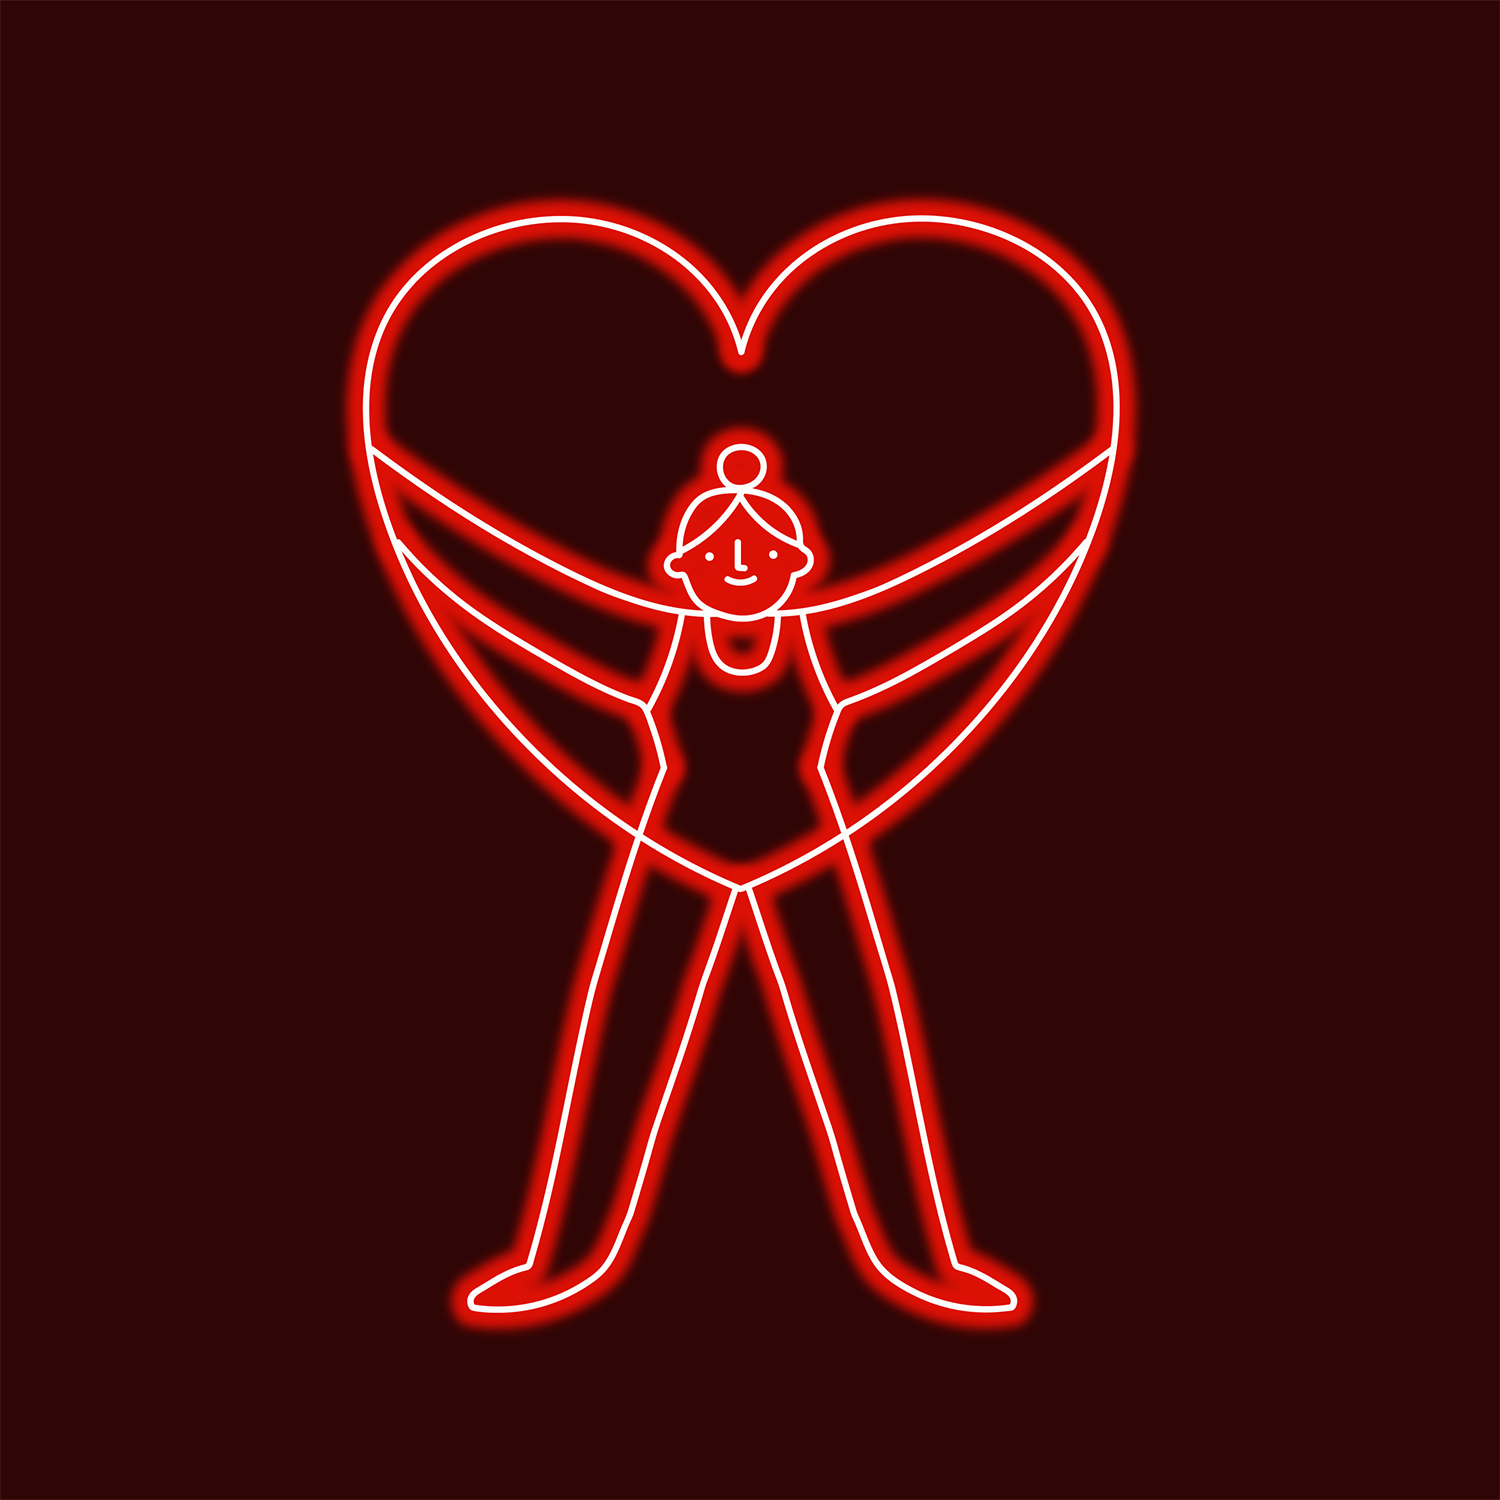 Illustration of a neon sign featuring a woman holding a heart-shape, glowing brightly with vibrant colors